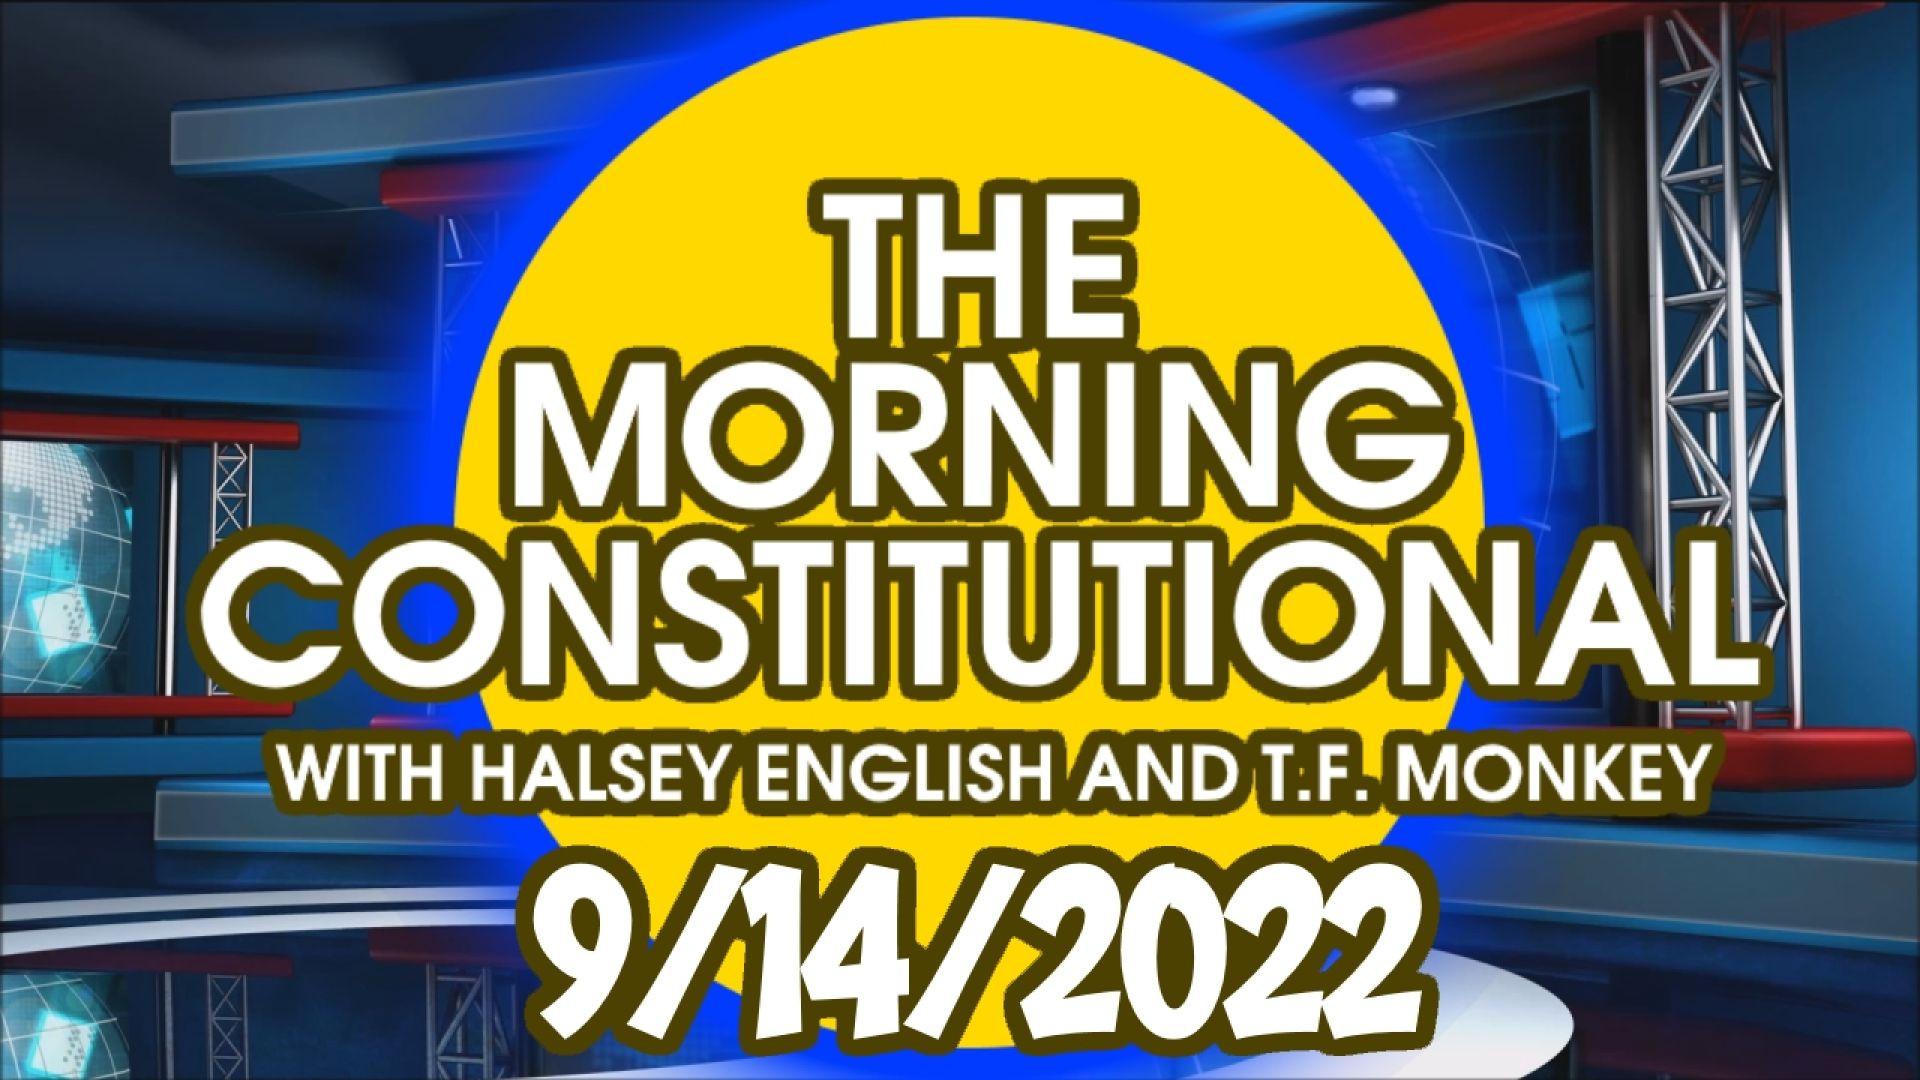 The Morning Constitutional: 9/14/2022